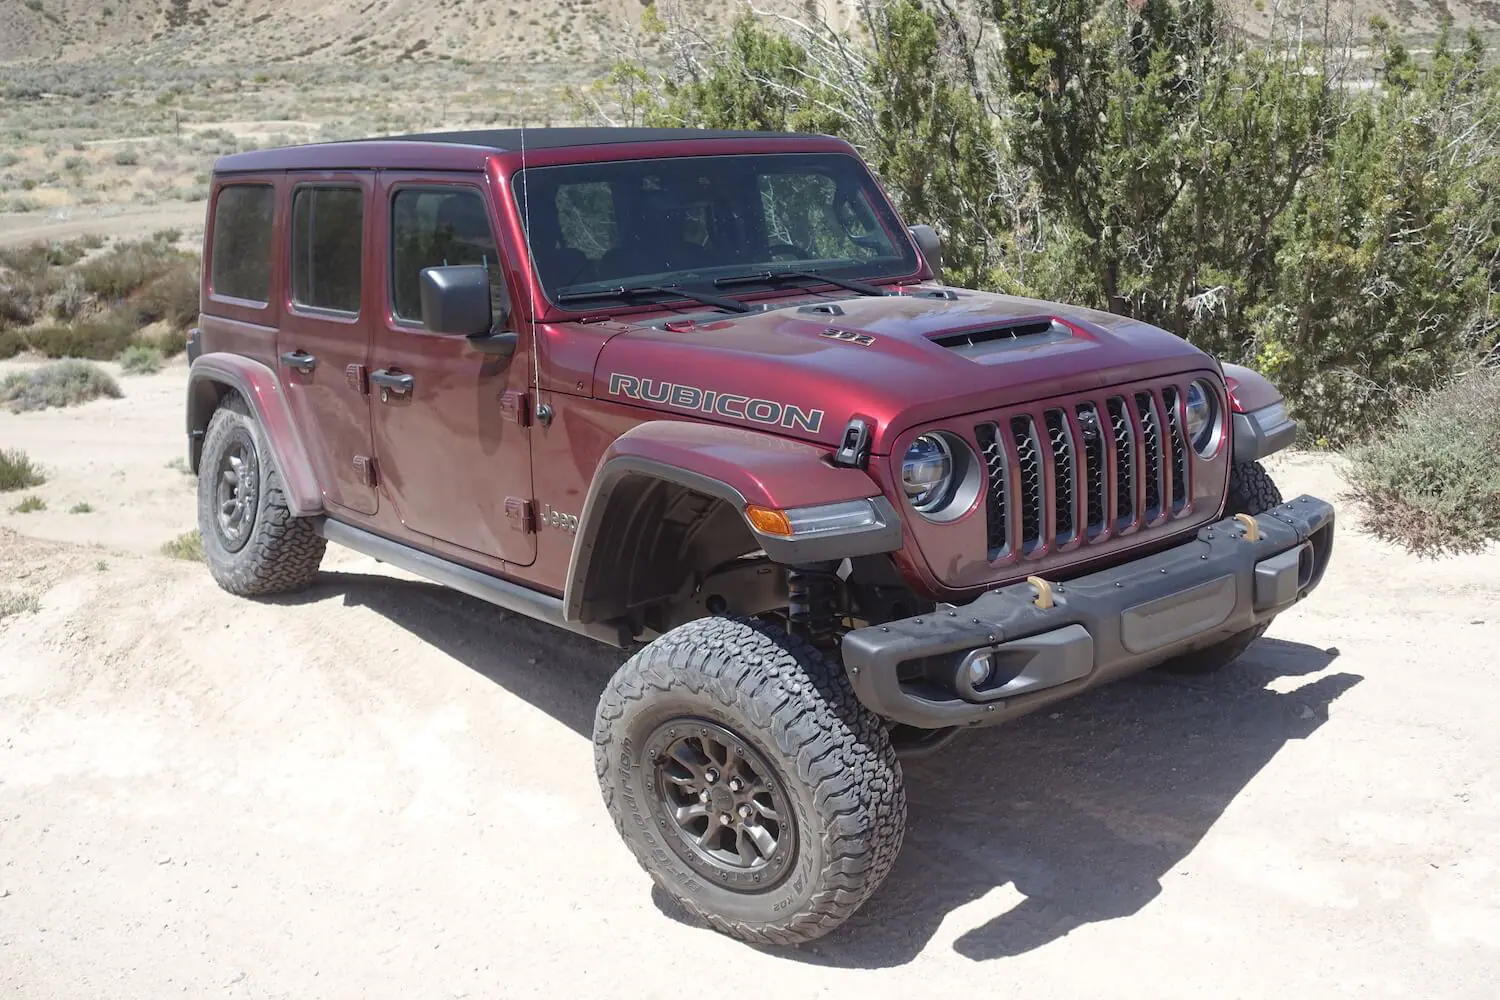 Test Drive: 2021 Jeep Wrangler Unlimited Rubicon 392 - The Dirt by 4WP